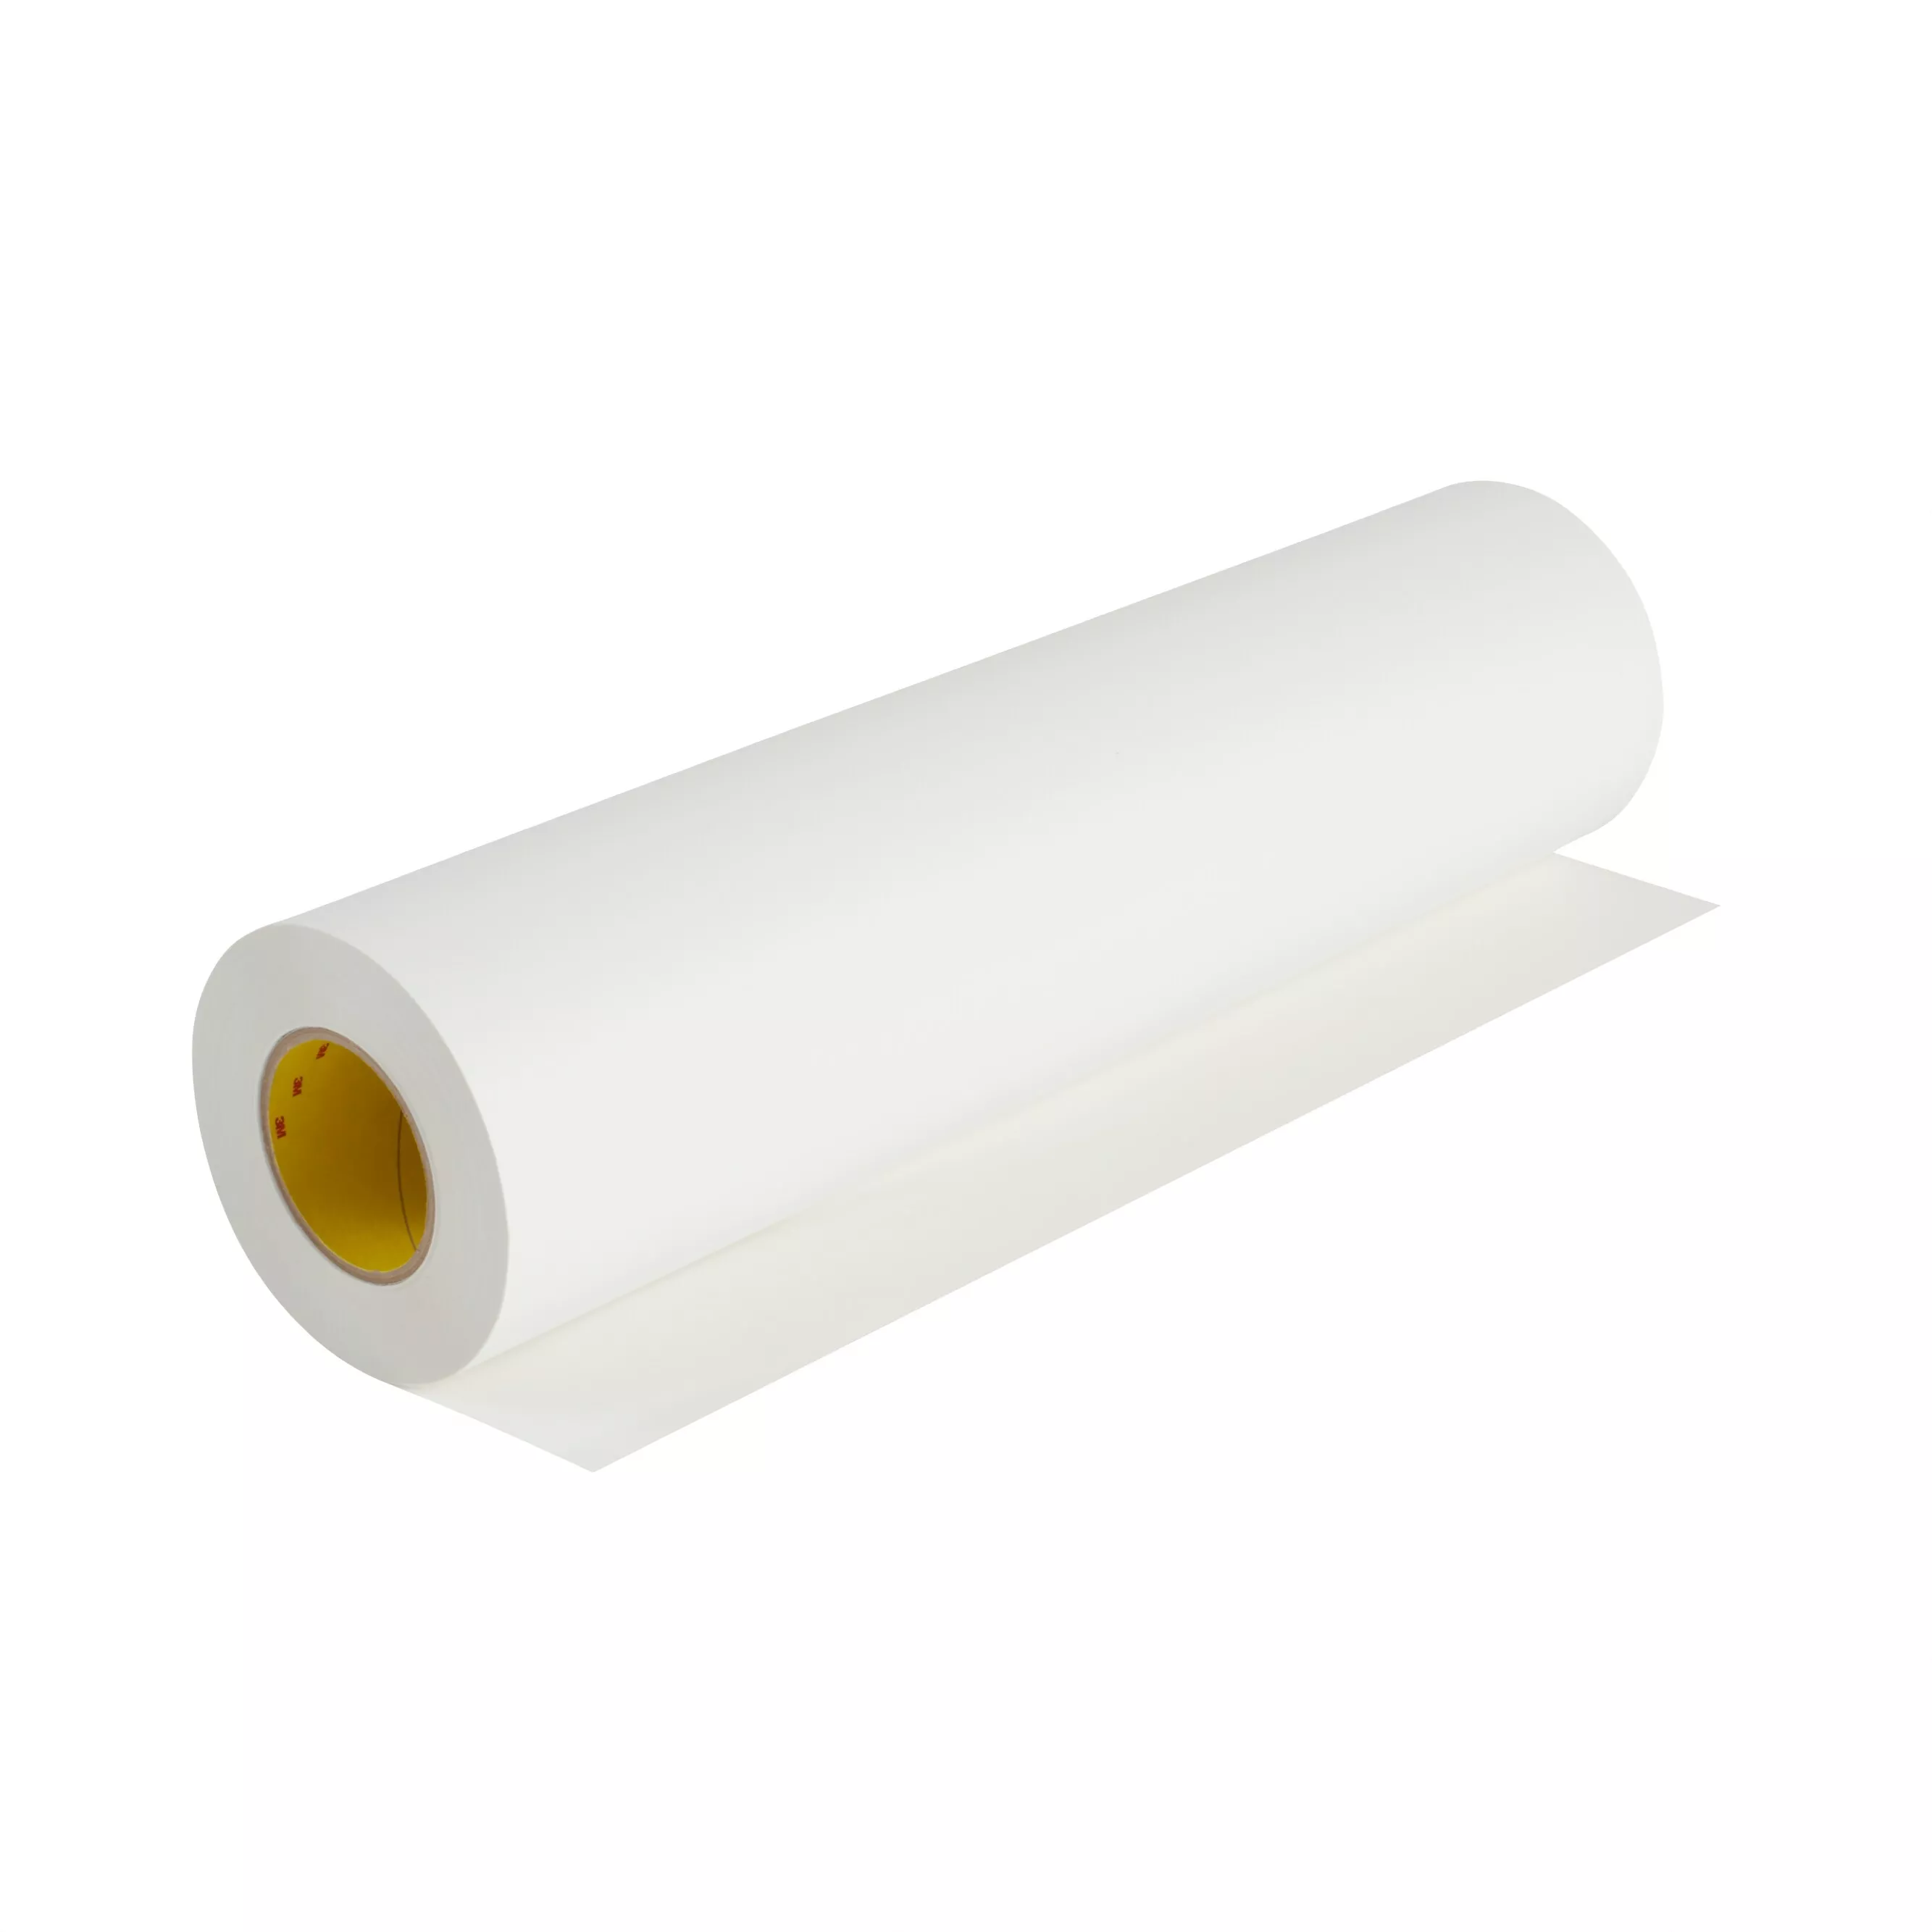 Product Number 941PC | 3M™ Removable Repositionable Tape 9415PC